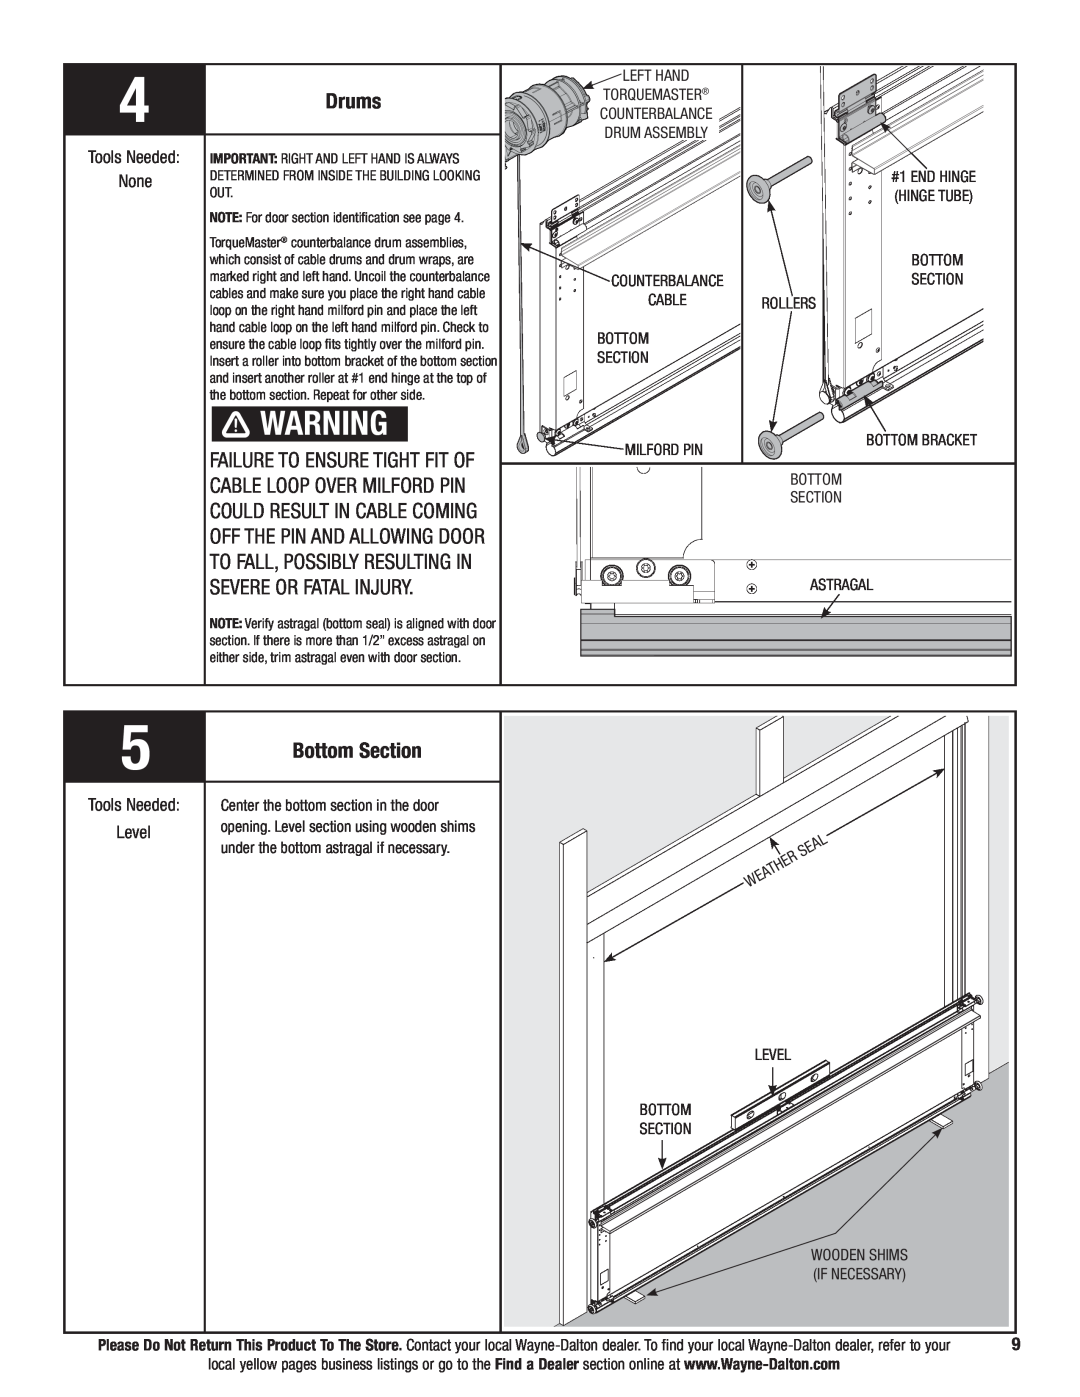 Wayne-Dalton 9700 installation instructions Drums, Bottom Section, Tools Needed None 